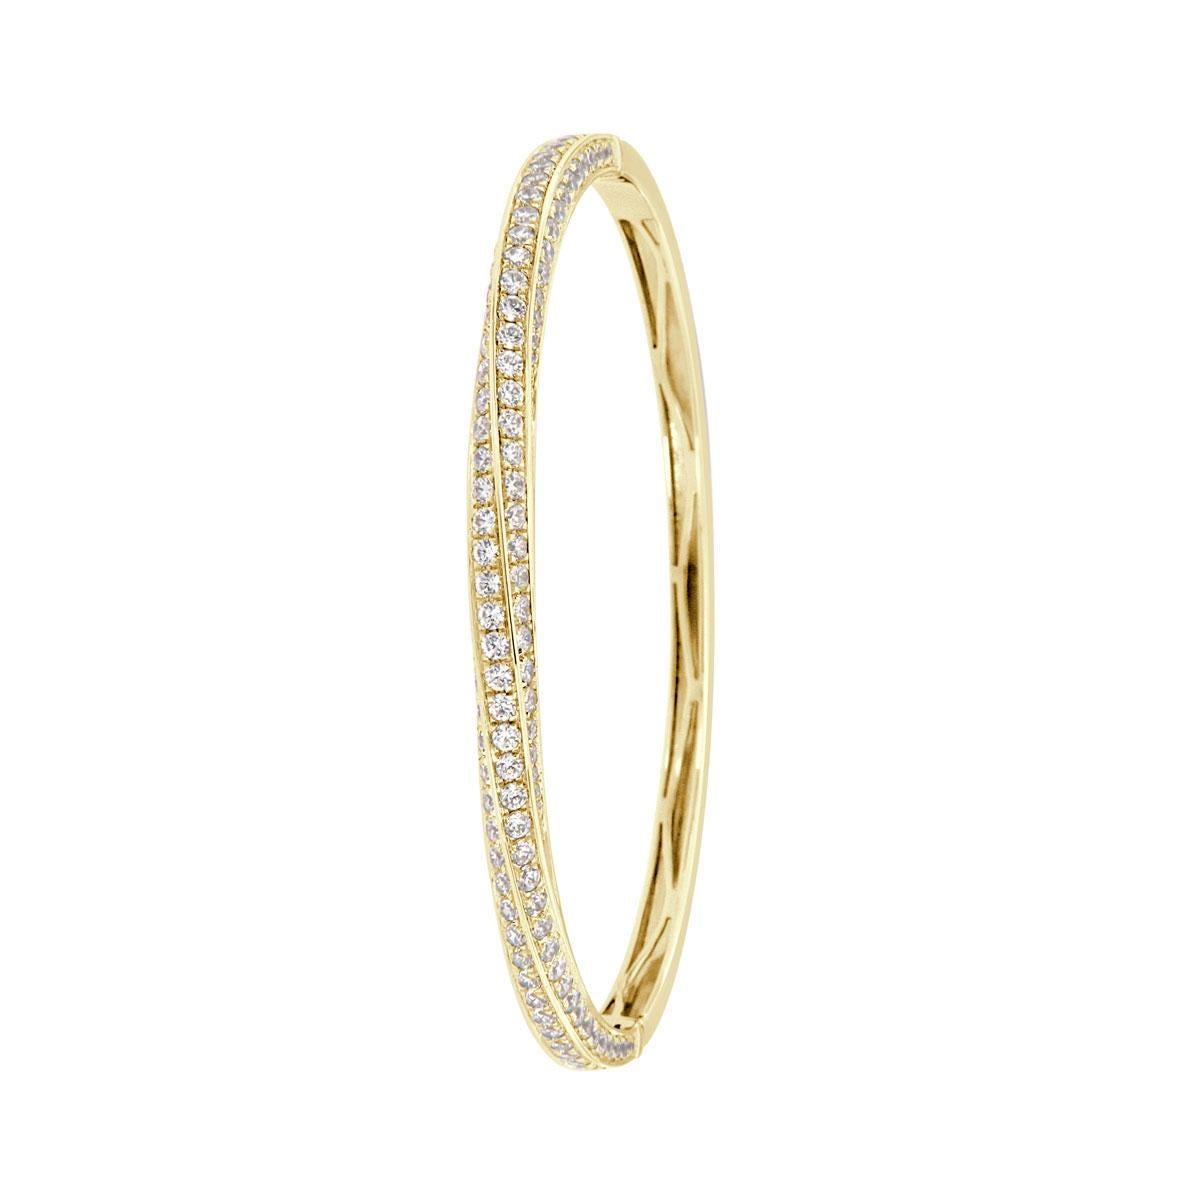 This stunning bangle features five intertwined rows of round brilliant diamonds micro-prong-set. Experience the difference!

Product details: 

Center Gemstone Type: NATURAL DIAMOND
Center Gemstone Color: WHITE
Center Gemstone Shape: ROUND
Center